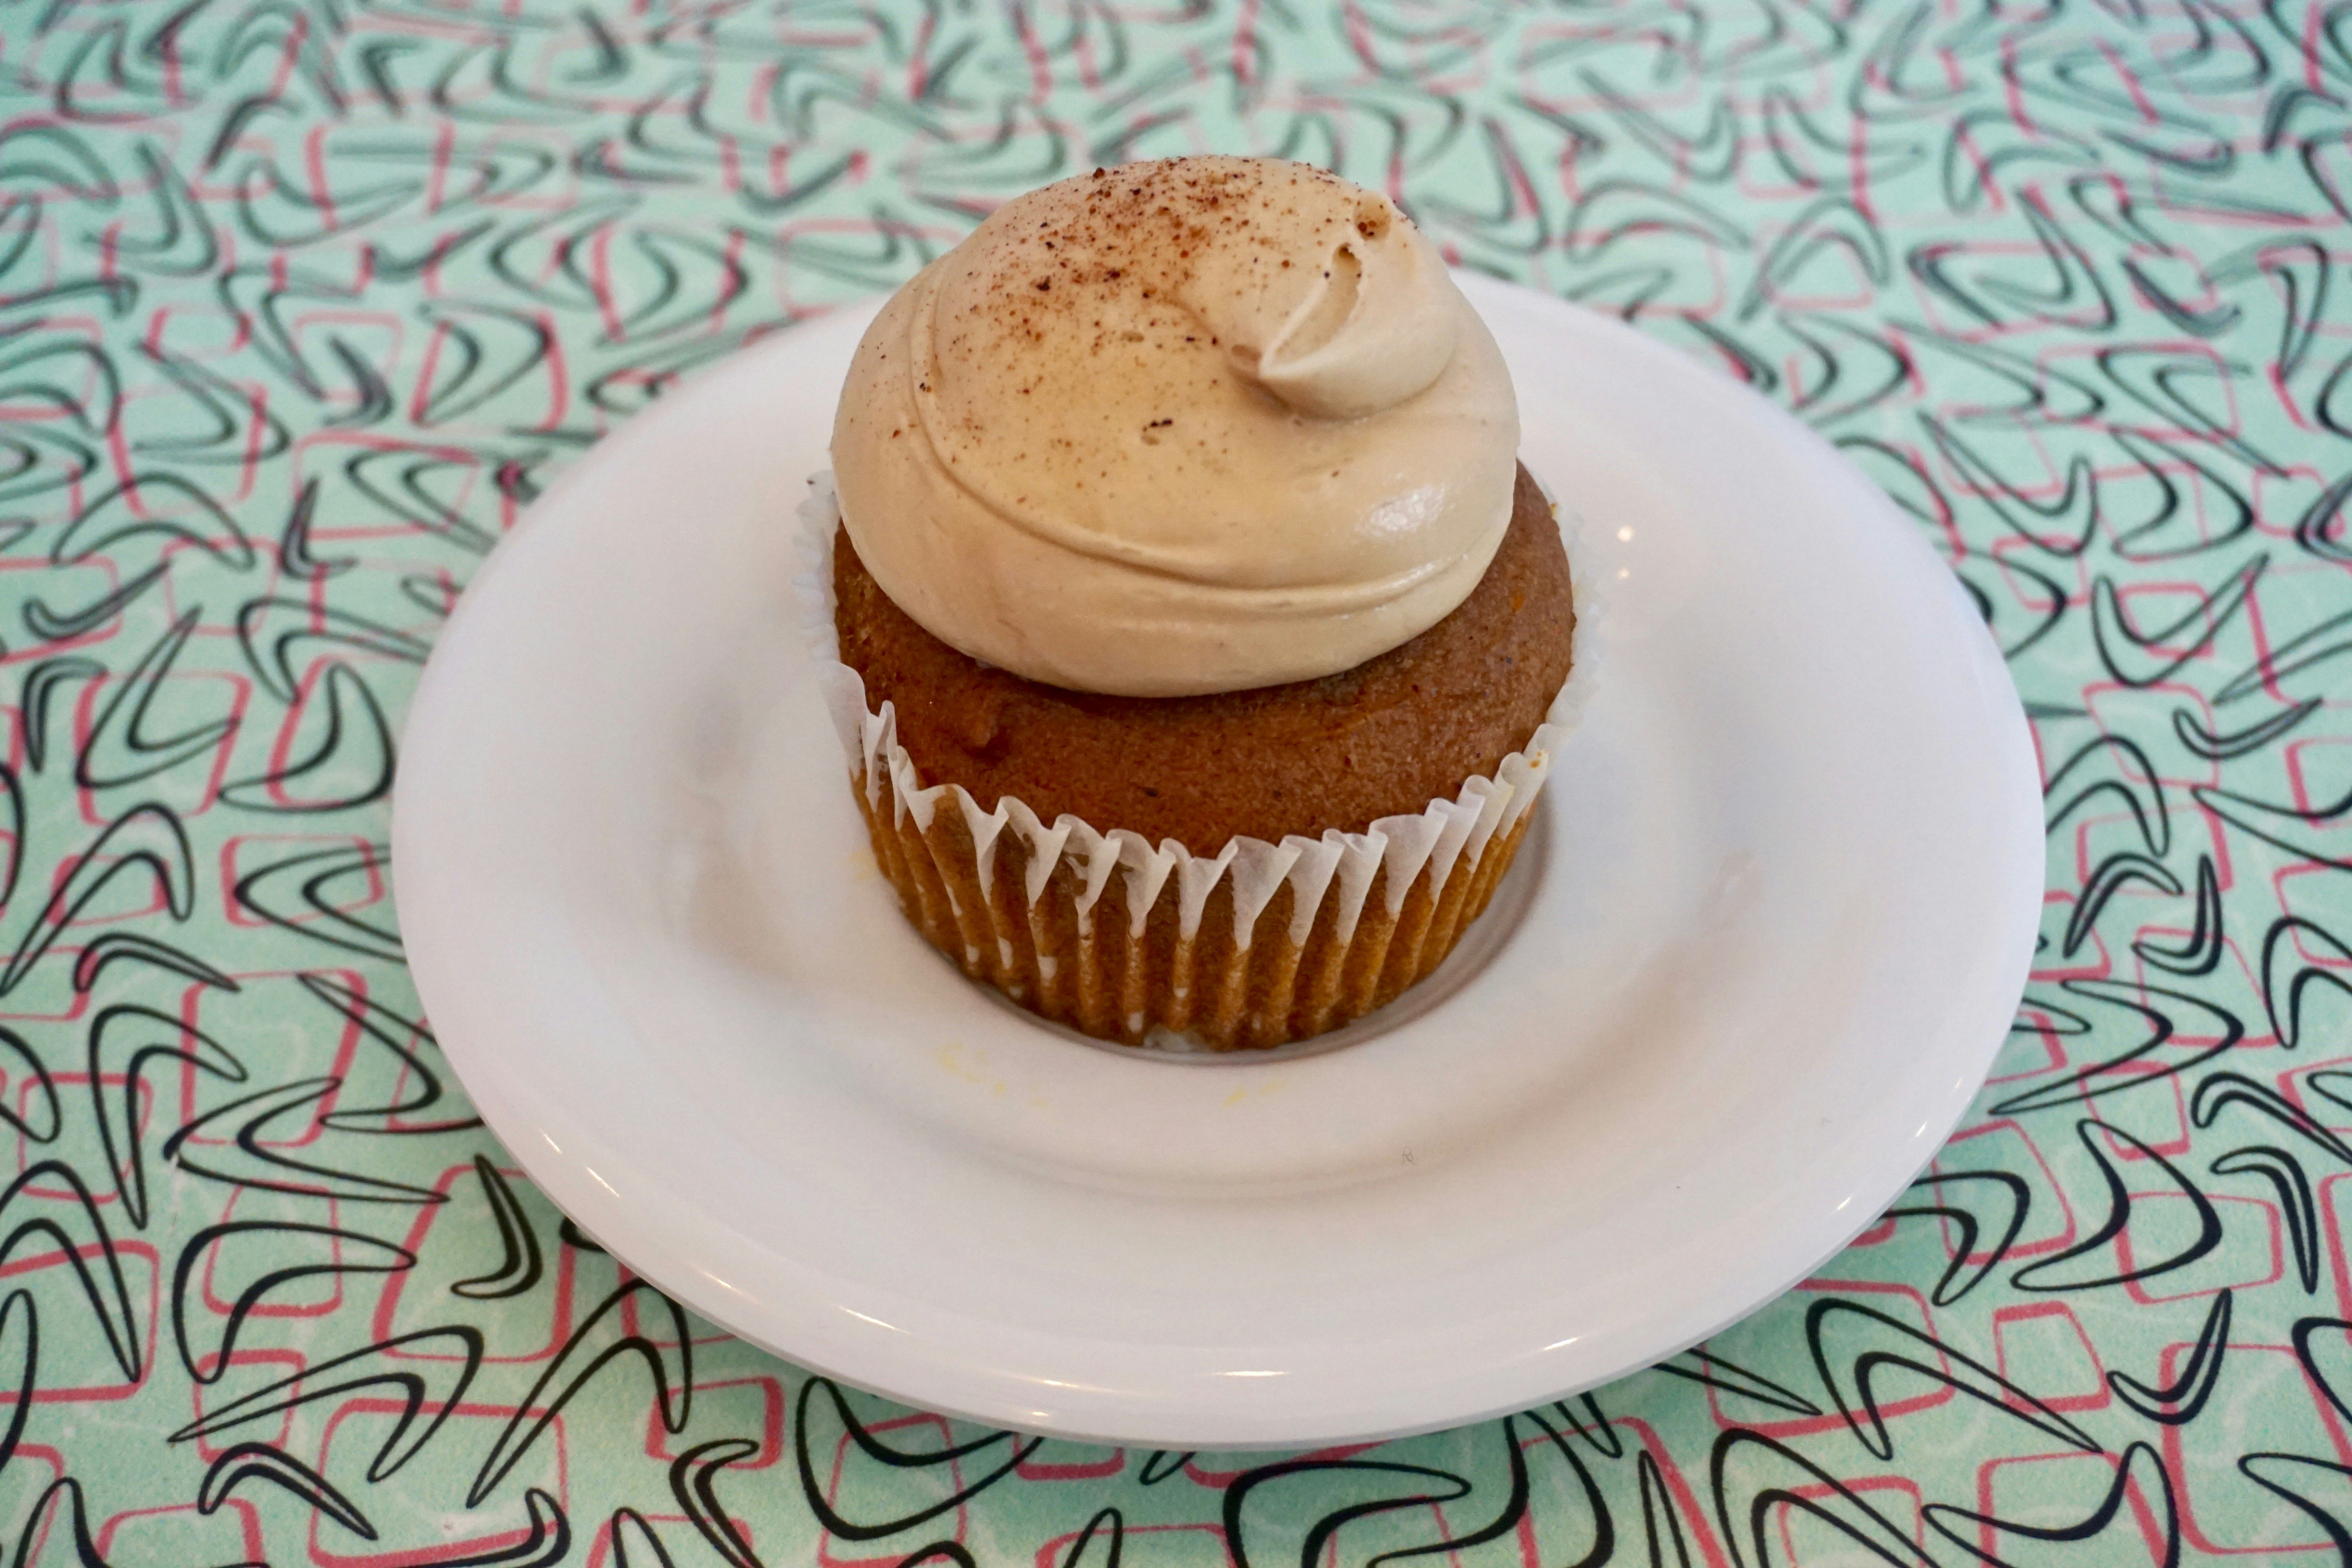 A cupcake with a generous swirl of icing sits on a white plate; underneath is a light blue tablecloth with a pink and black abstract pattern.